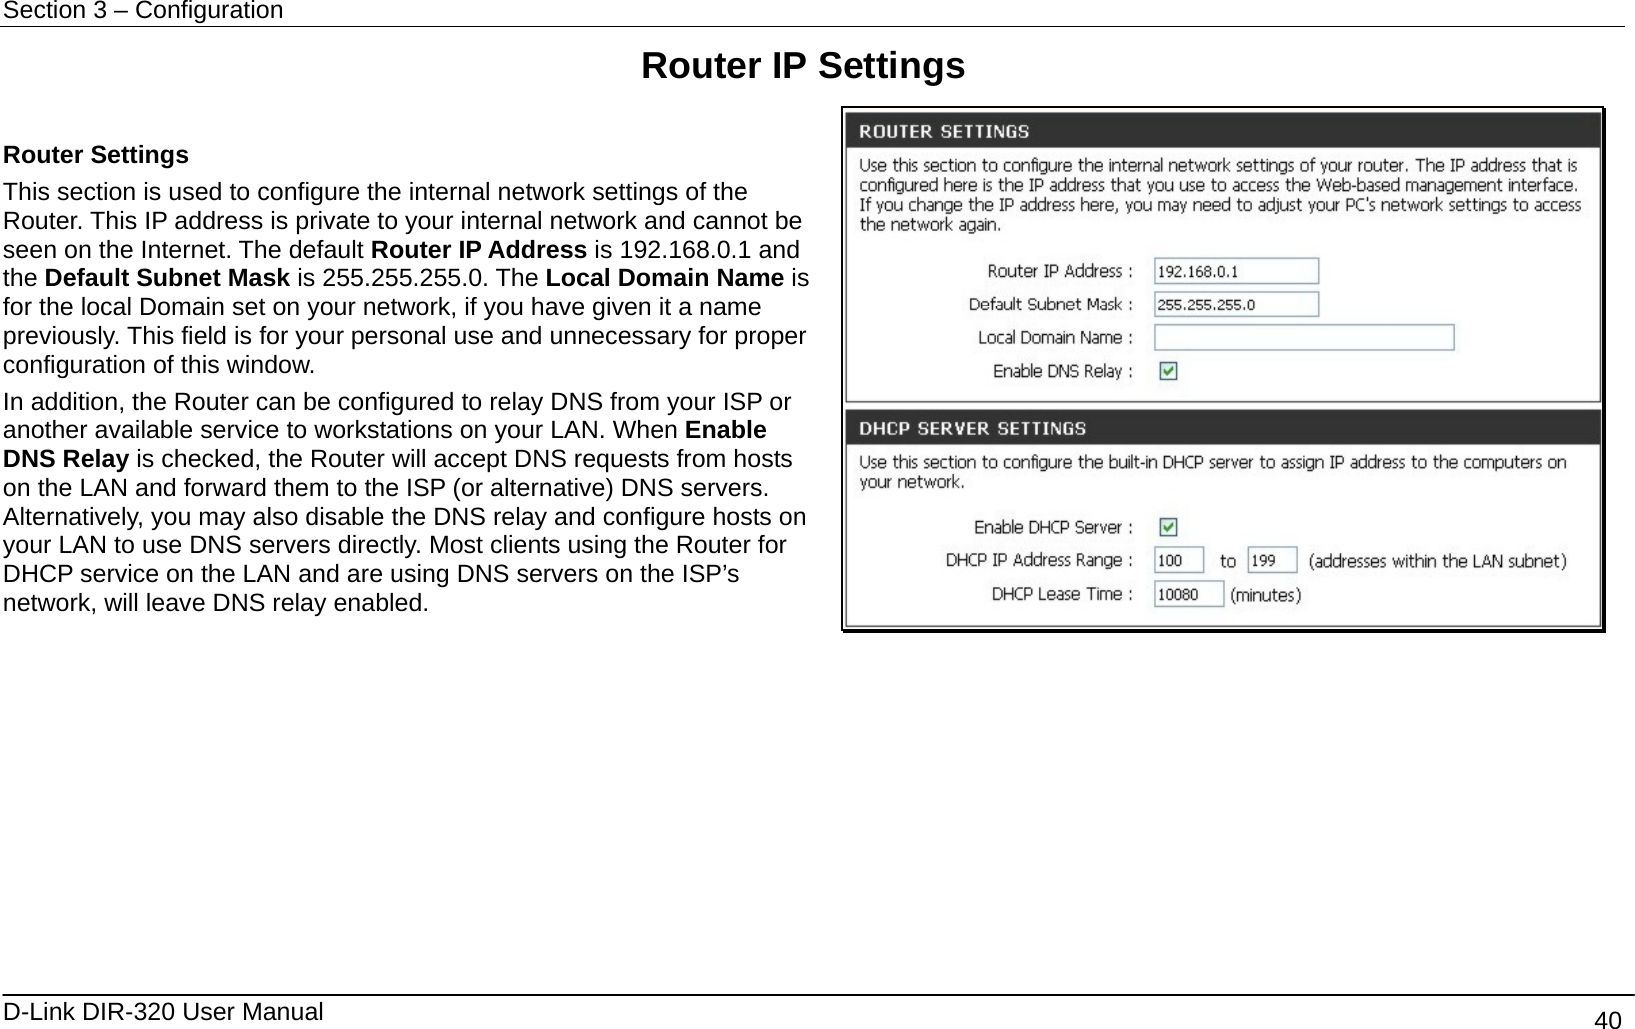 Section 3 – Configuration   D-Link DIR-320 User Manual                                       40 Router IP Settings   Router Settings This section is used to configure the internal network settings of the Router. This IP address is private to your internal network and cannot be seen on the Internet. The default Router IP Address is 192.168.0.1 and the Default Subnet Mask is 255.255.255.0. The Local Domain Name is for the local Domain set on your network, if you have given it a name previously. This field is for your personal use and unnecessary for proper configuration of this window.   In addition, the Router can be configured to relay DNS from your ISP or another available service to workstations on your LAN. When Enable DNS Relay is checked, the Router will accept DNS requests from hosts on the LAN and forward them to the ISP (or alternative) DNS servers. Alternatively, you may also disable the DNS relay and configure hosts on your LAN to use DNS servers directly. Most clients using the Router for DHCP service on the LAN and are using DNS servers on the ISP’s network, will leave DNS relay enabled.          